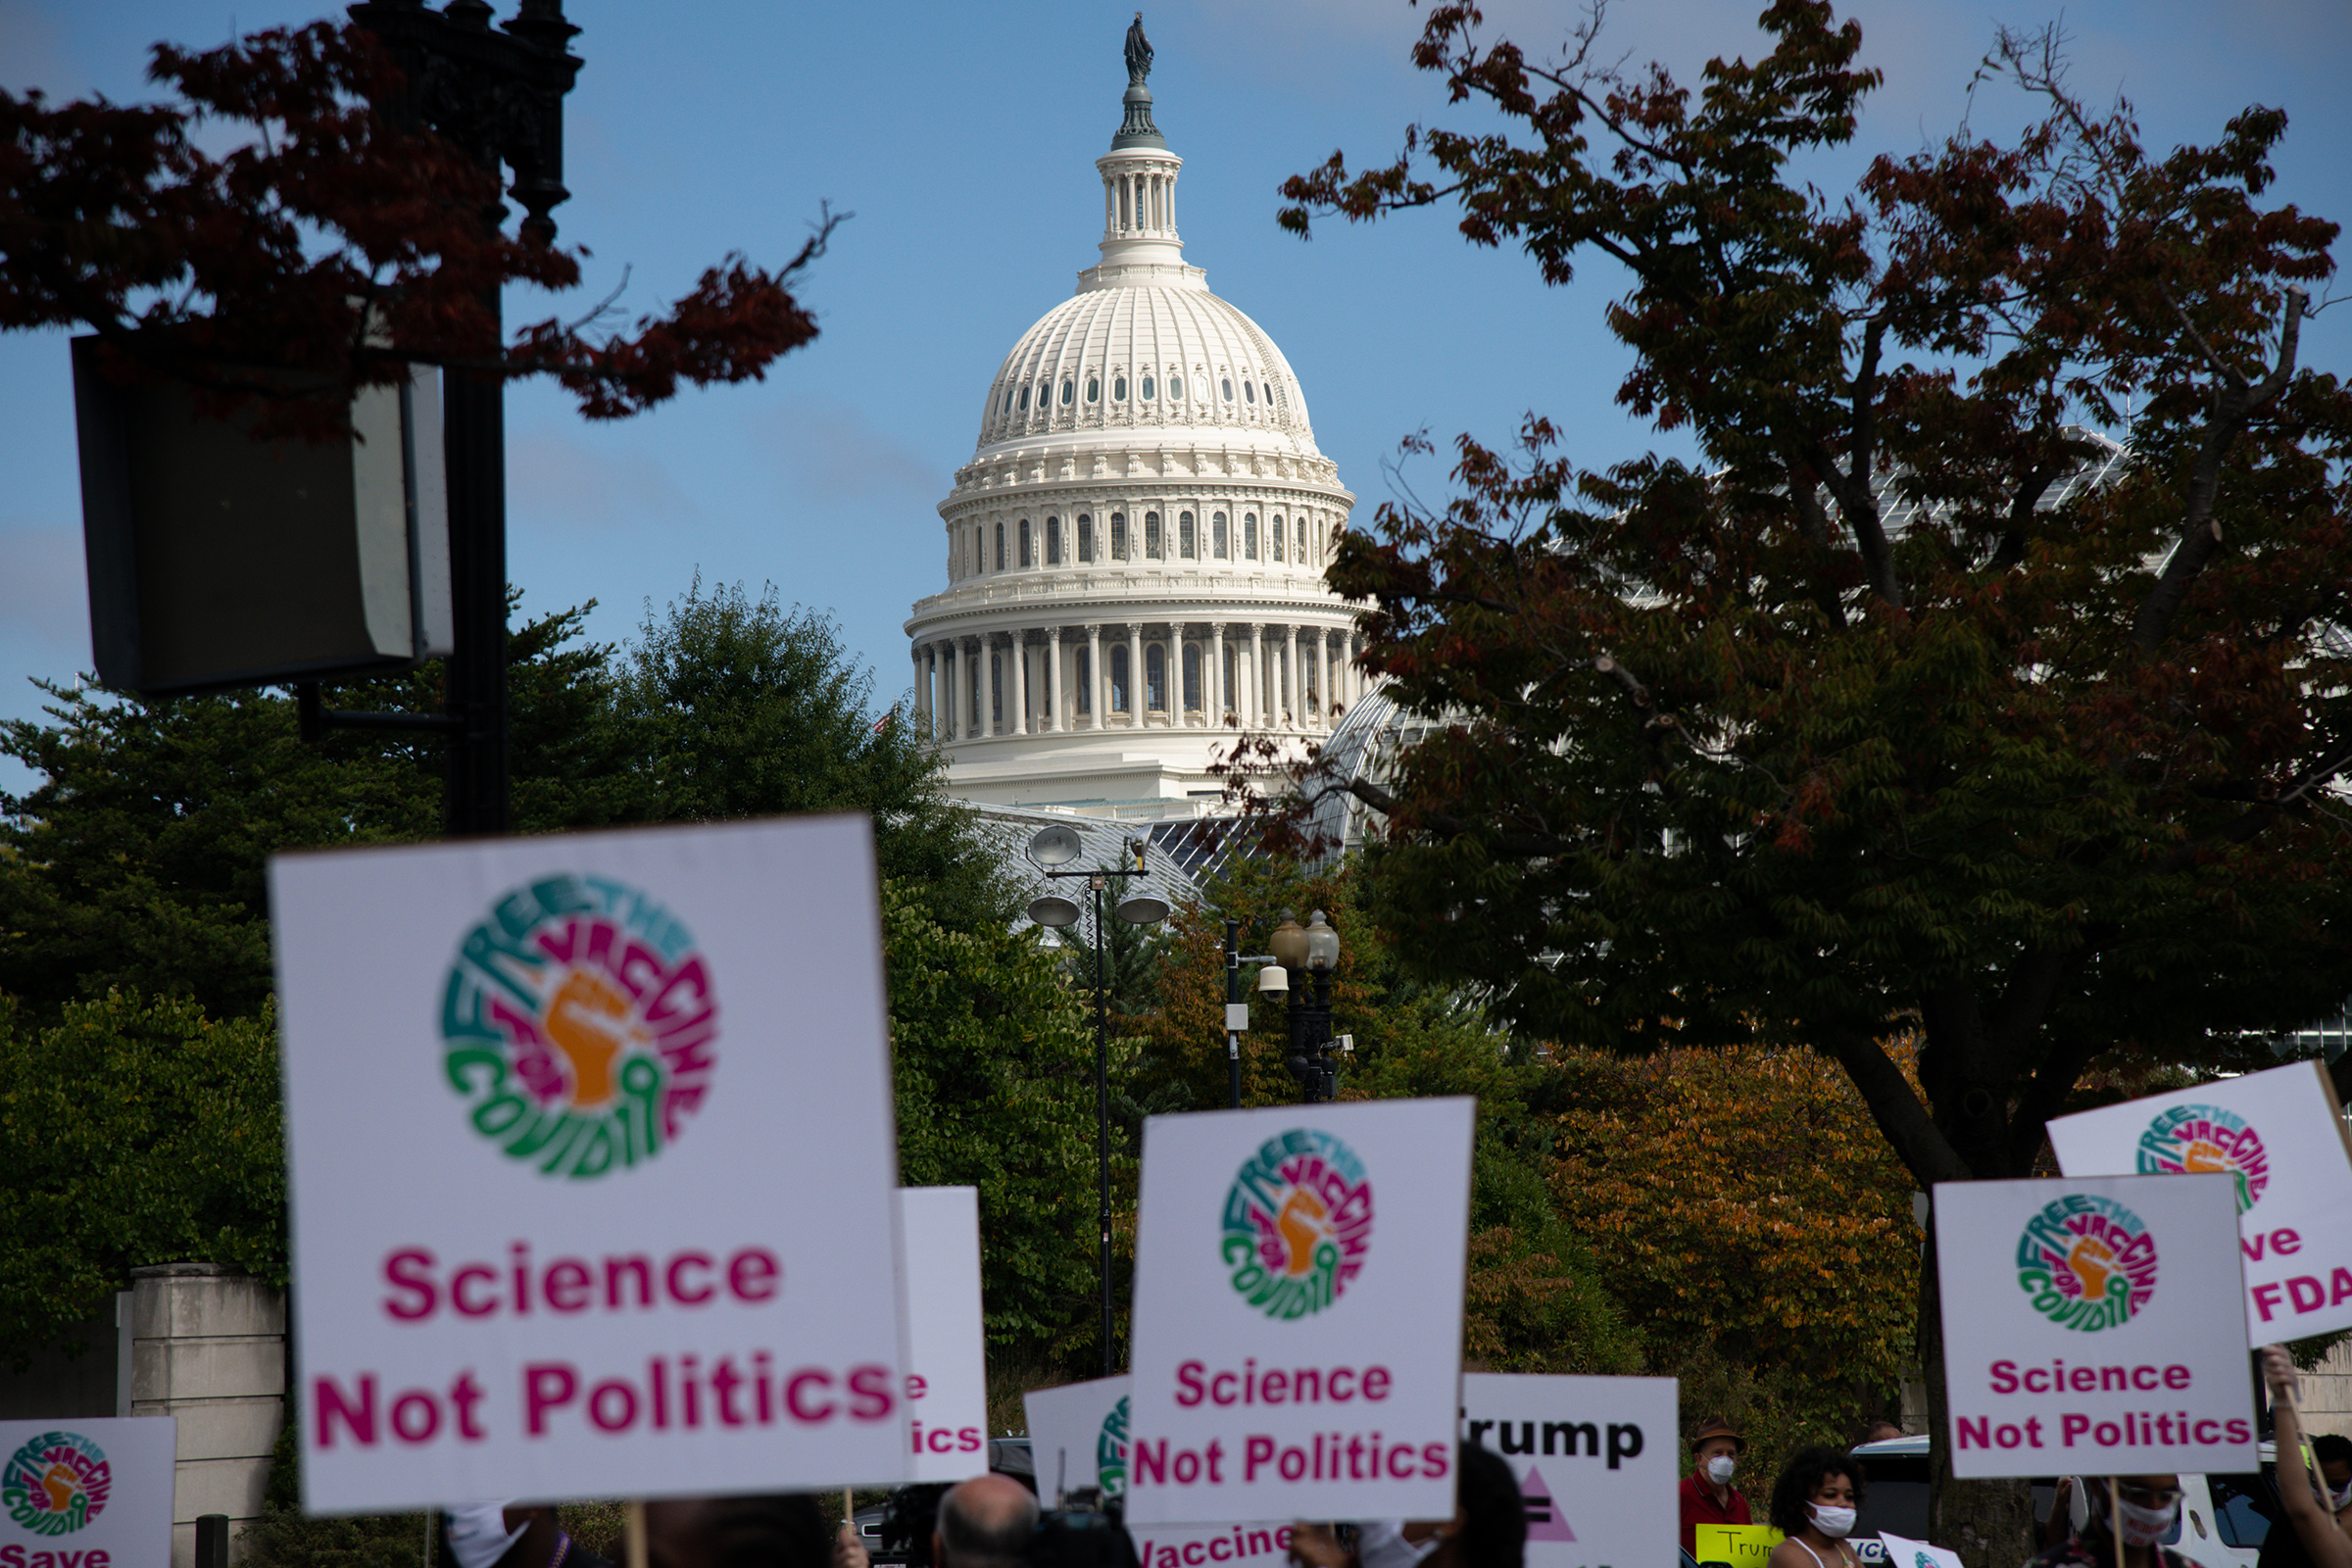 A view of the U.S. Capitol Building as demonstrators march to the Department of Health and Human Services (HHS) headquarters during a protest organized by groups calling for safe vaccines on Oct. 21